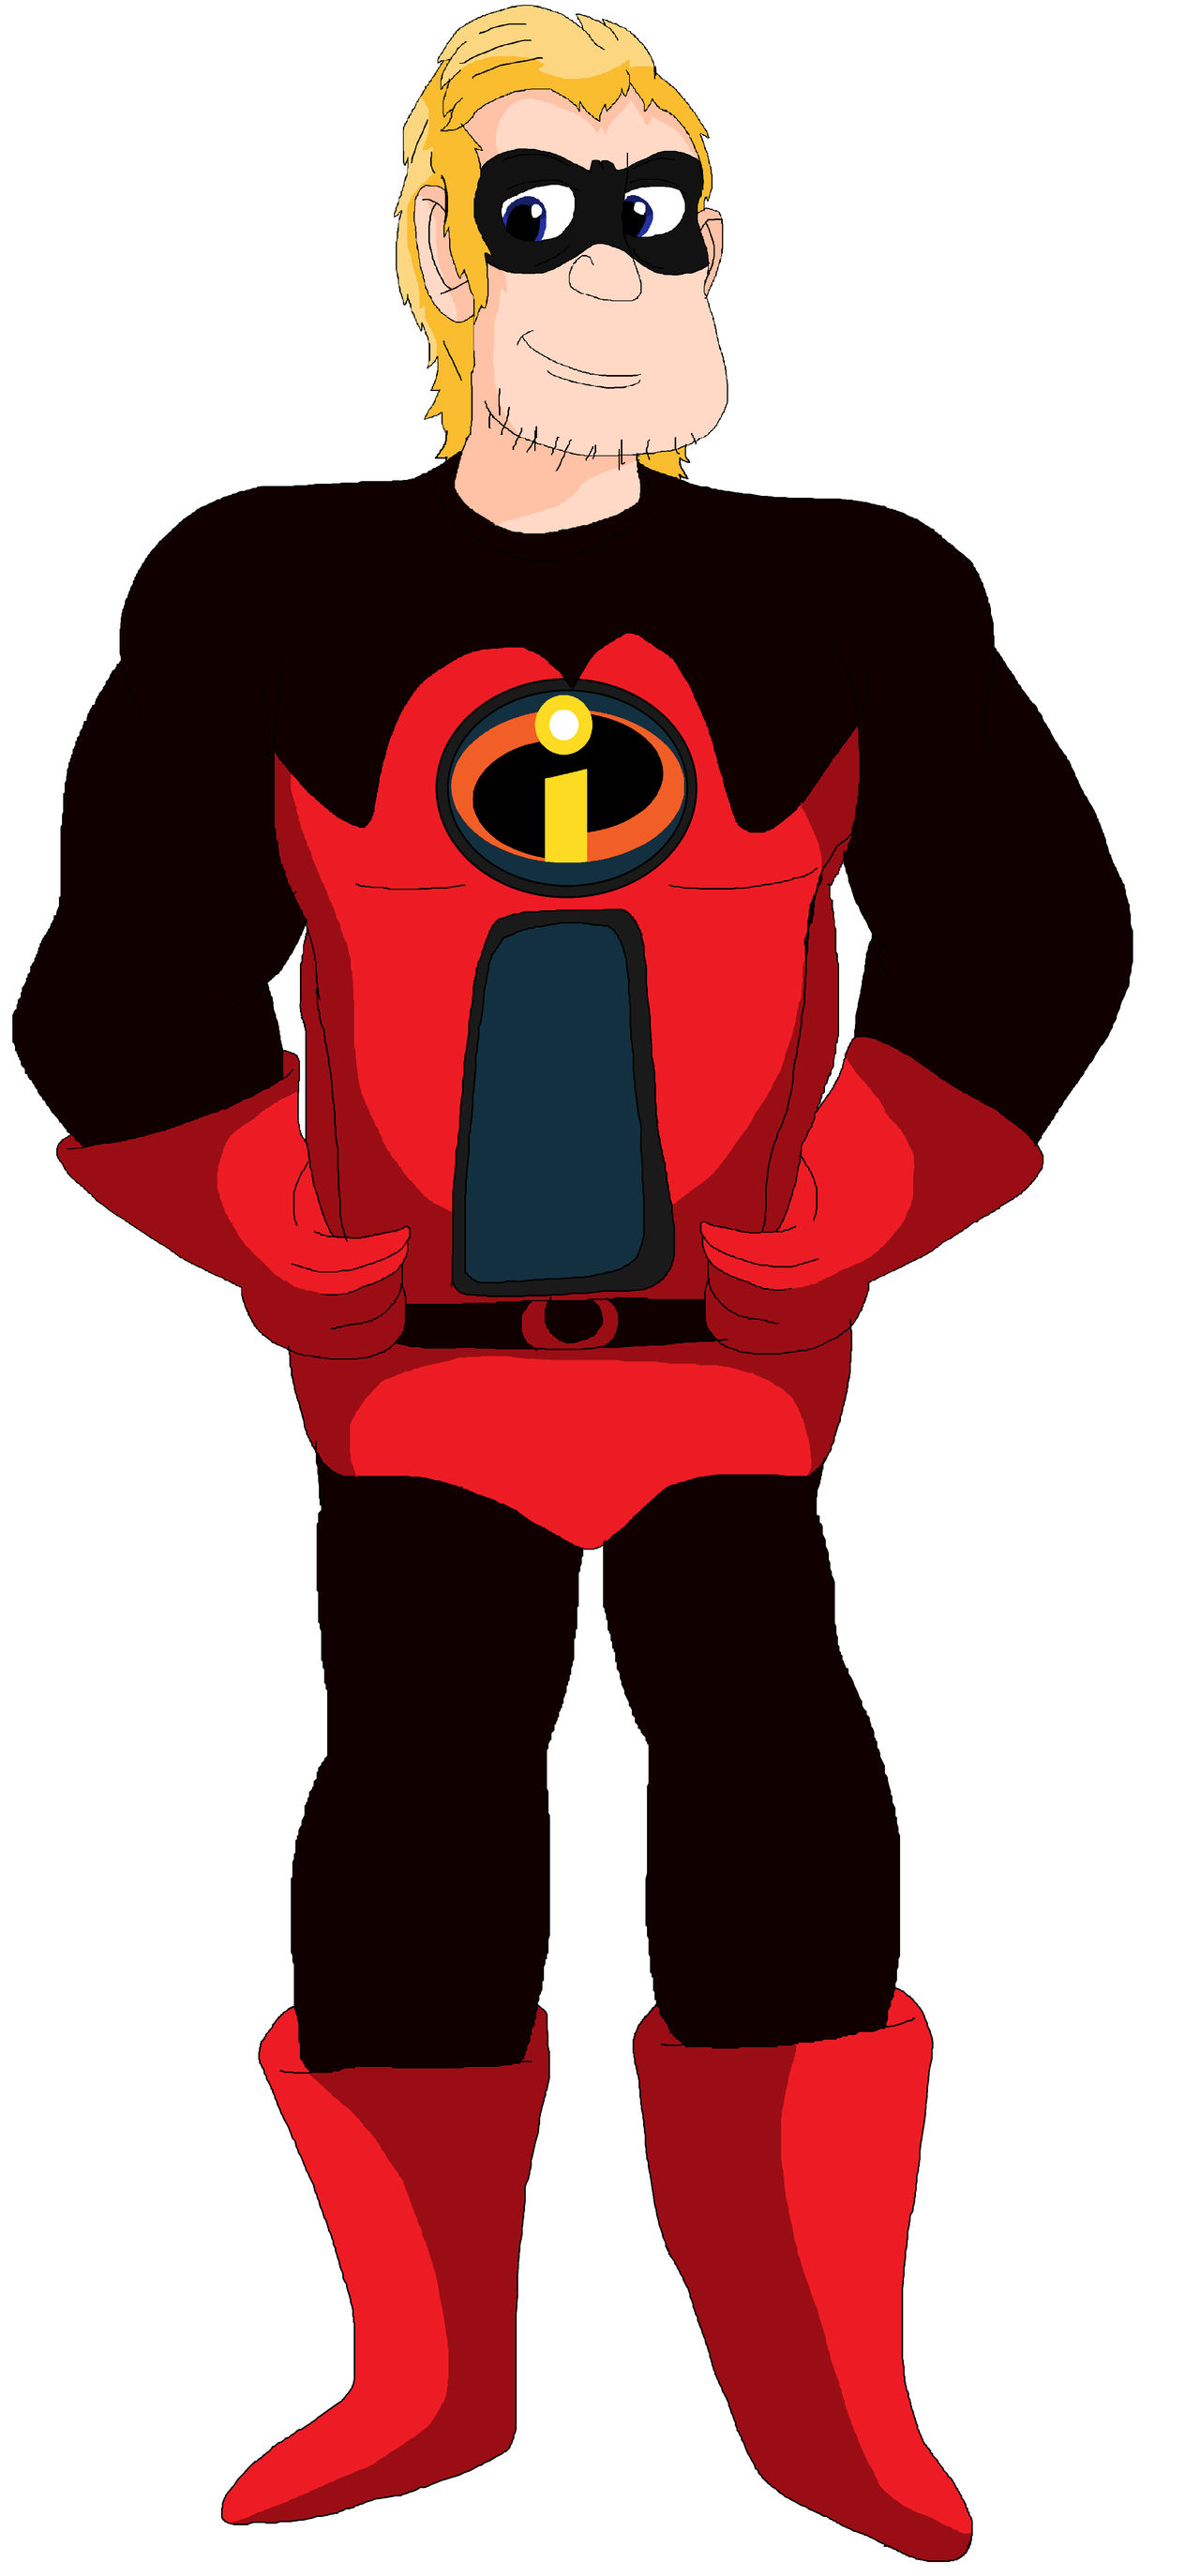 Drawing Of Mr Incredible (My Version) by JohnV2004 on DeviantArt